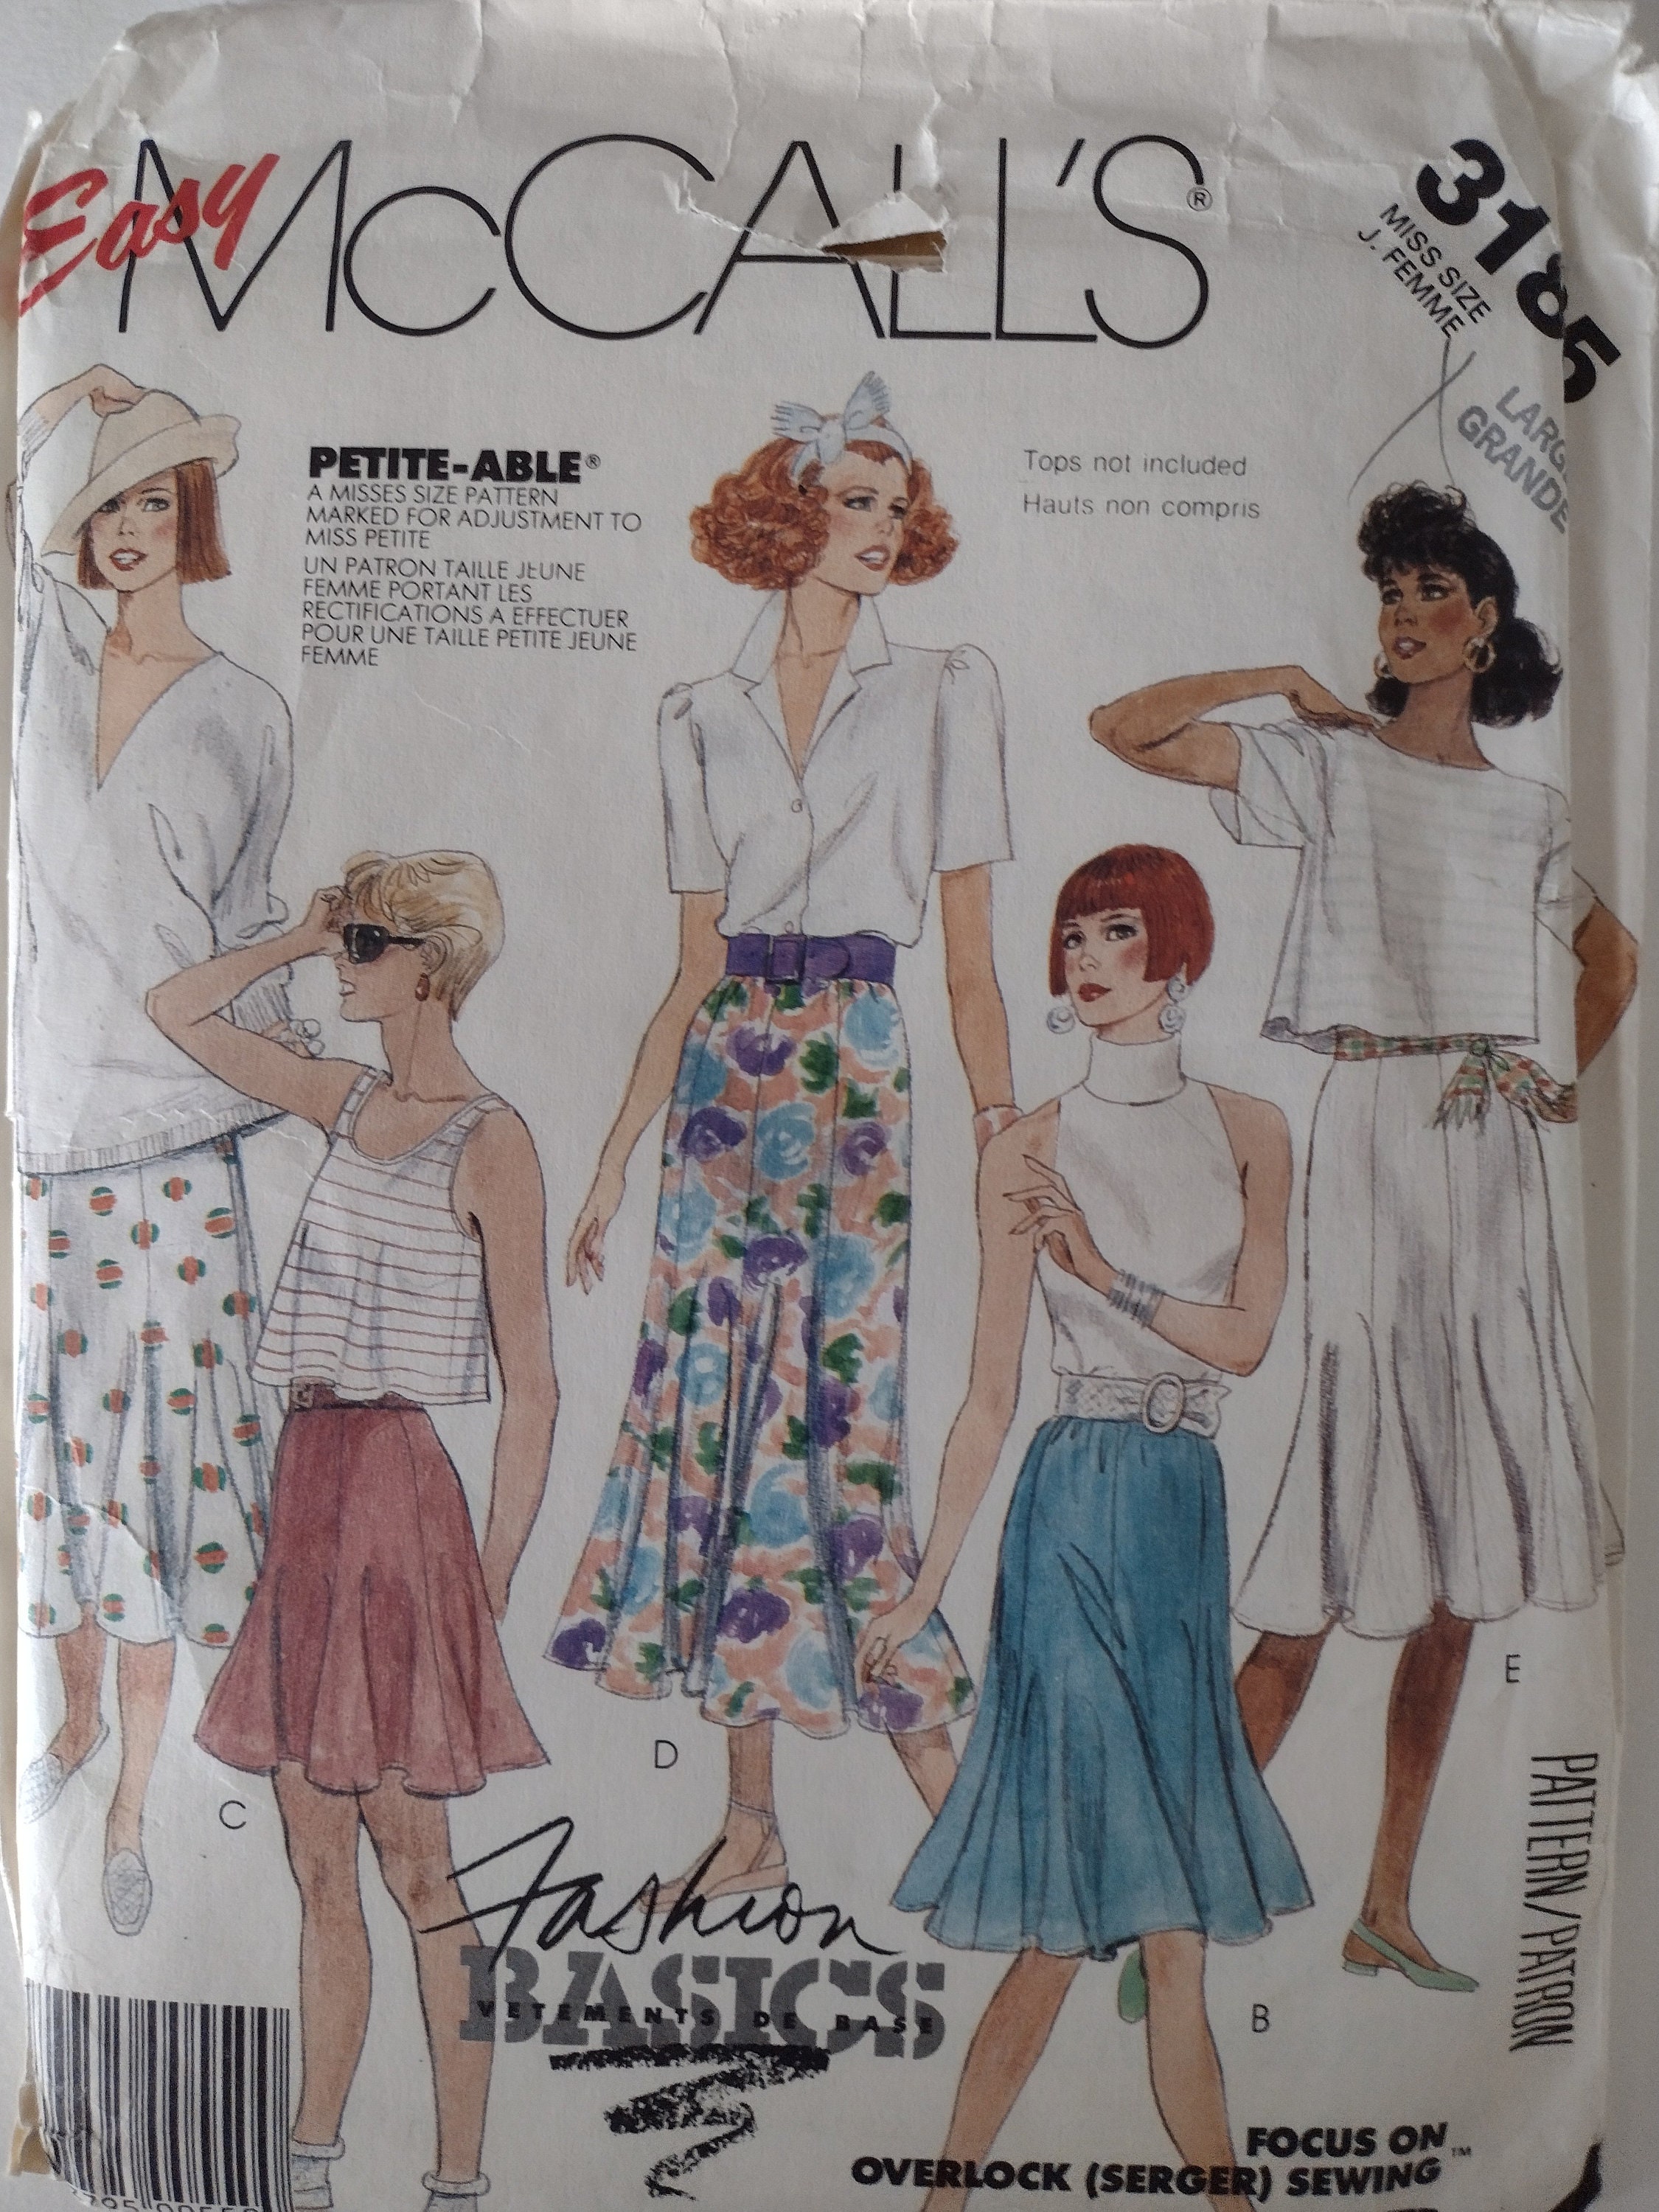 Simplicity 9607 Sewing for Dummies Pattern for Girls Fashions in  Sizes3,4,5,6 